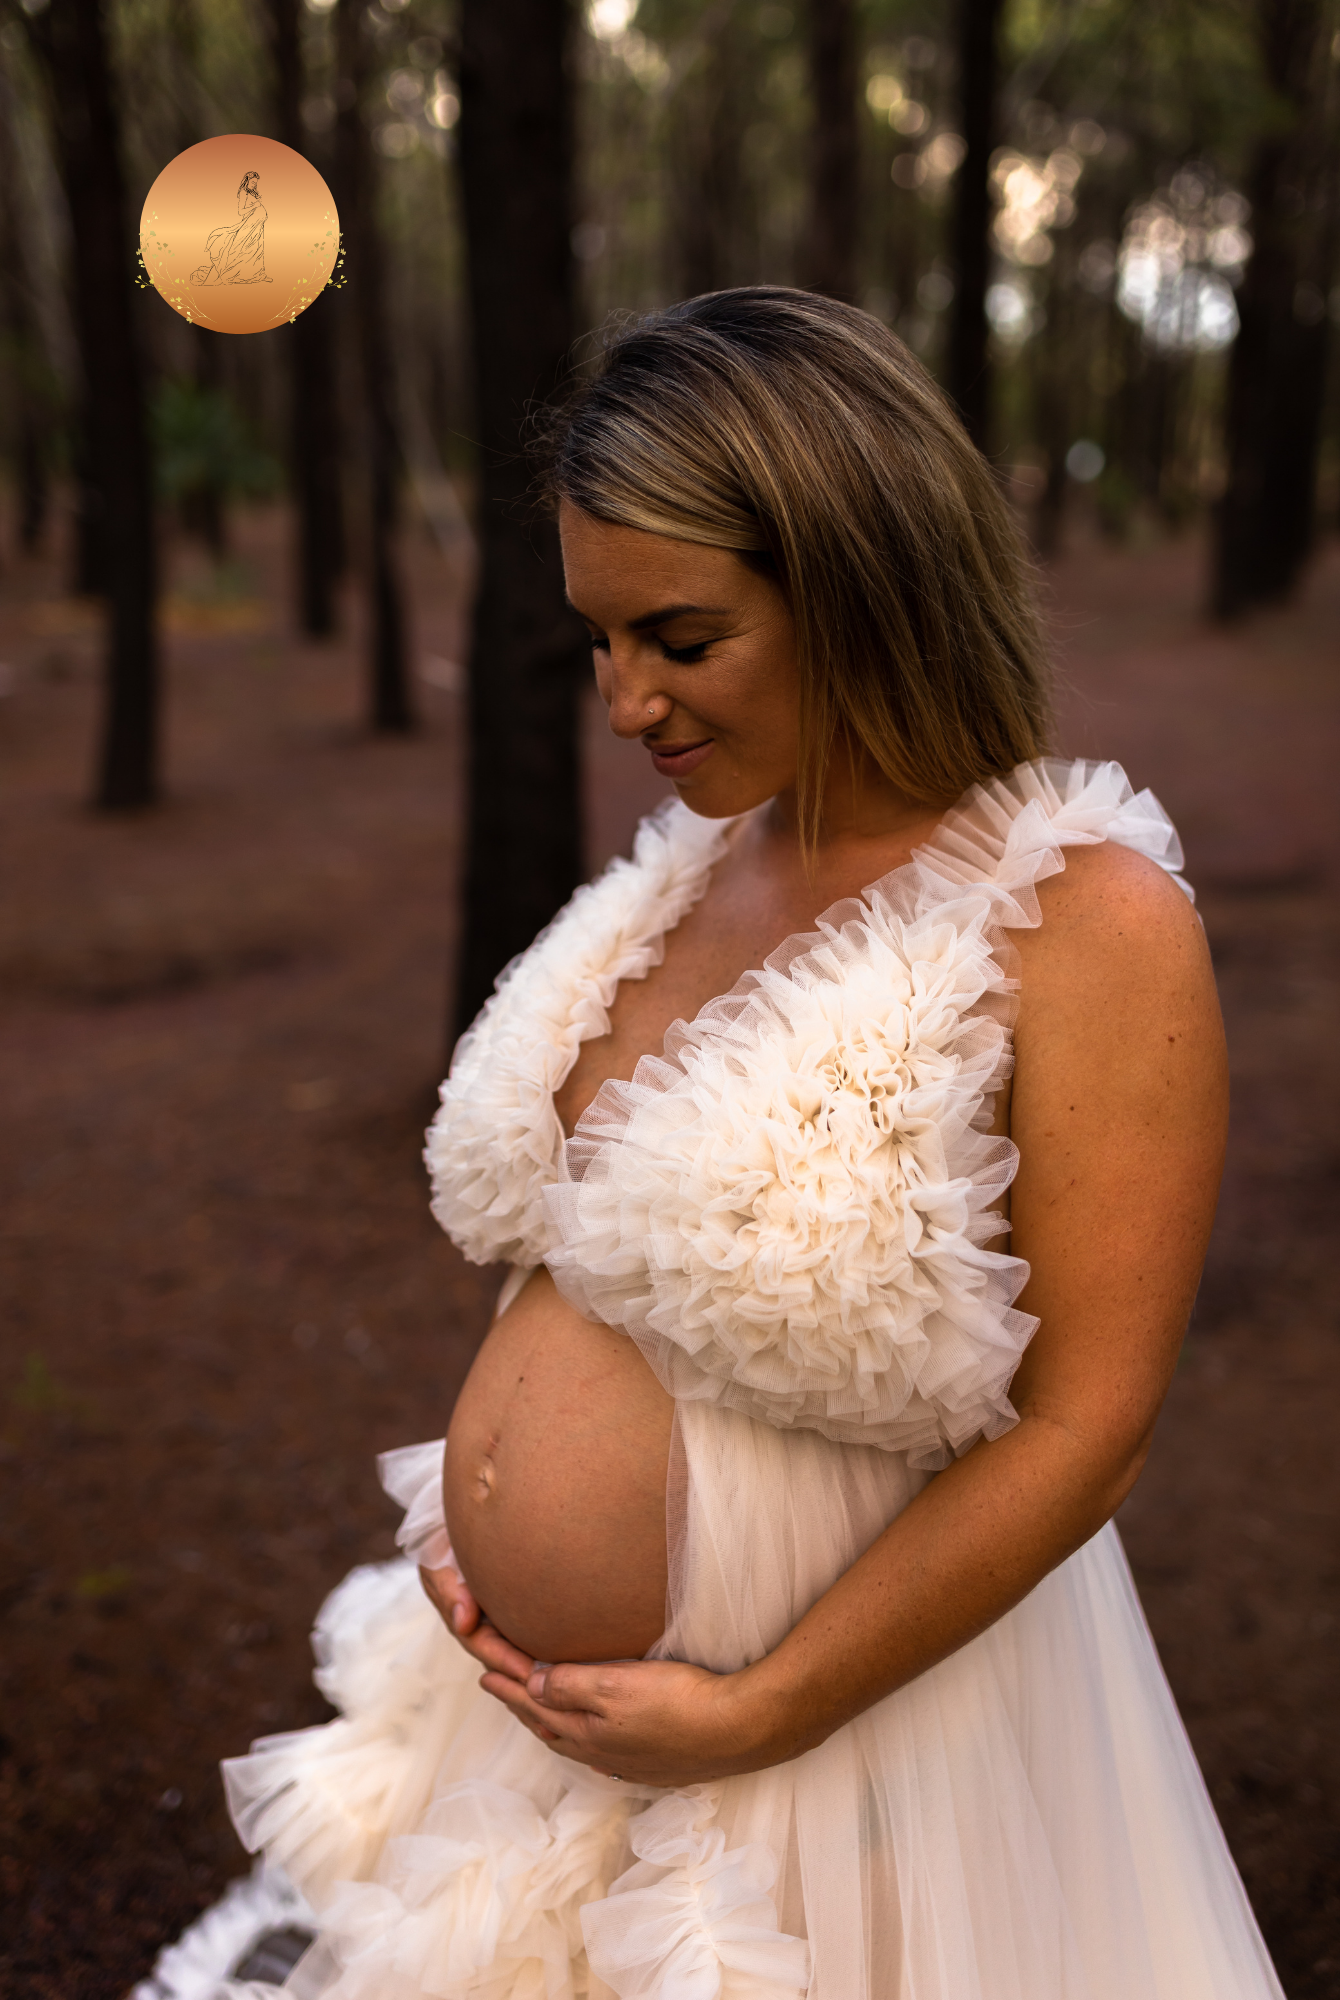 maternity photo shoot gown